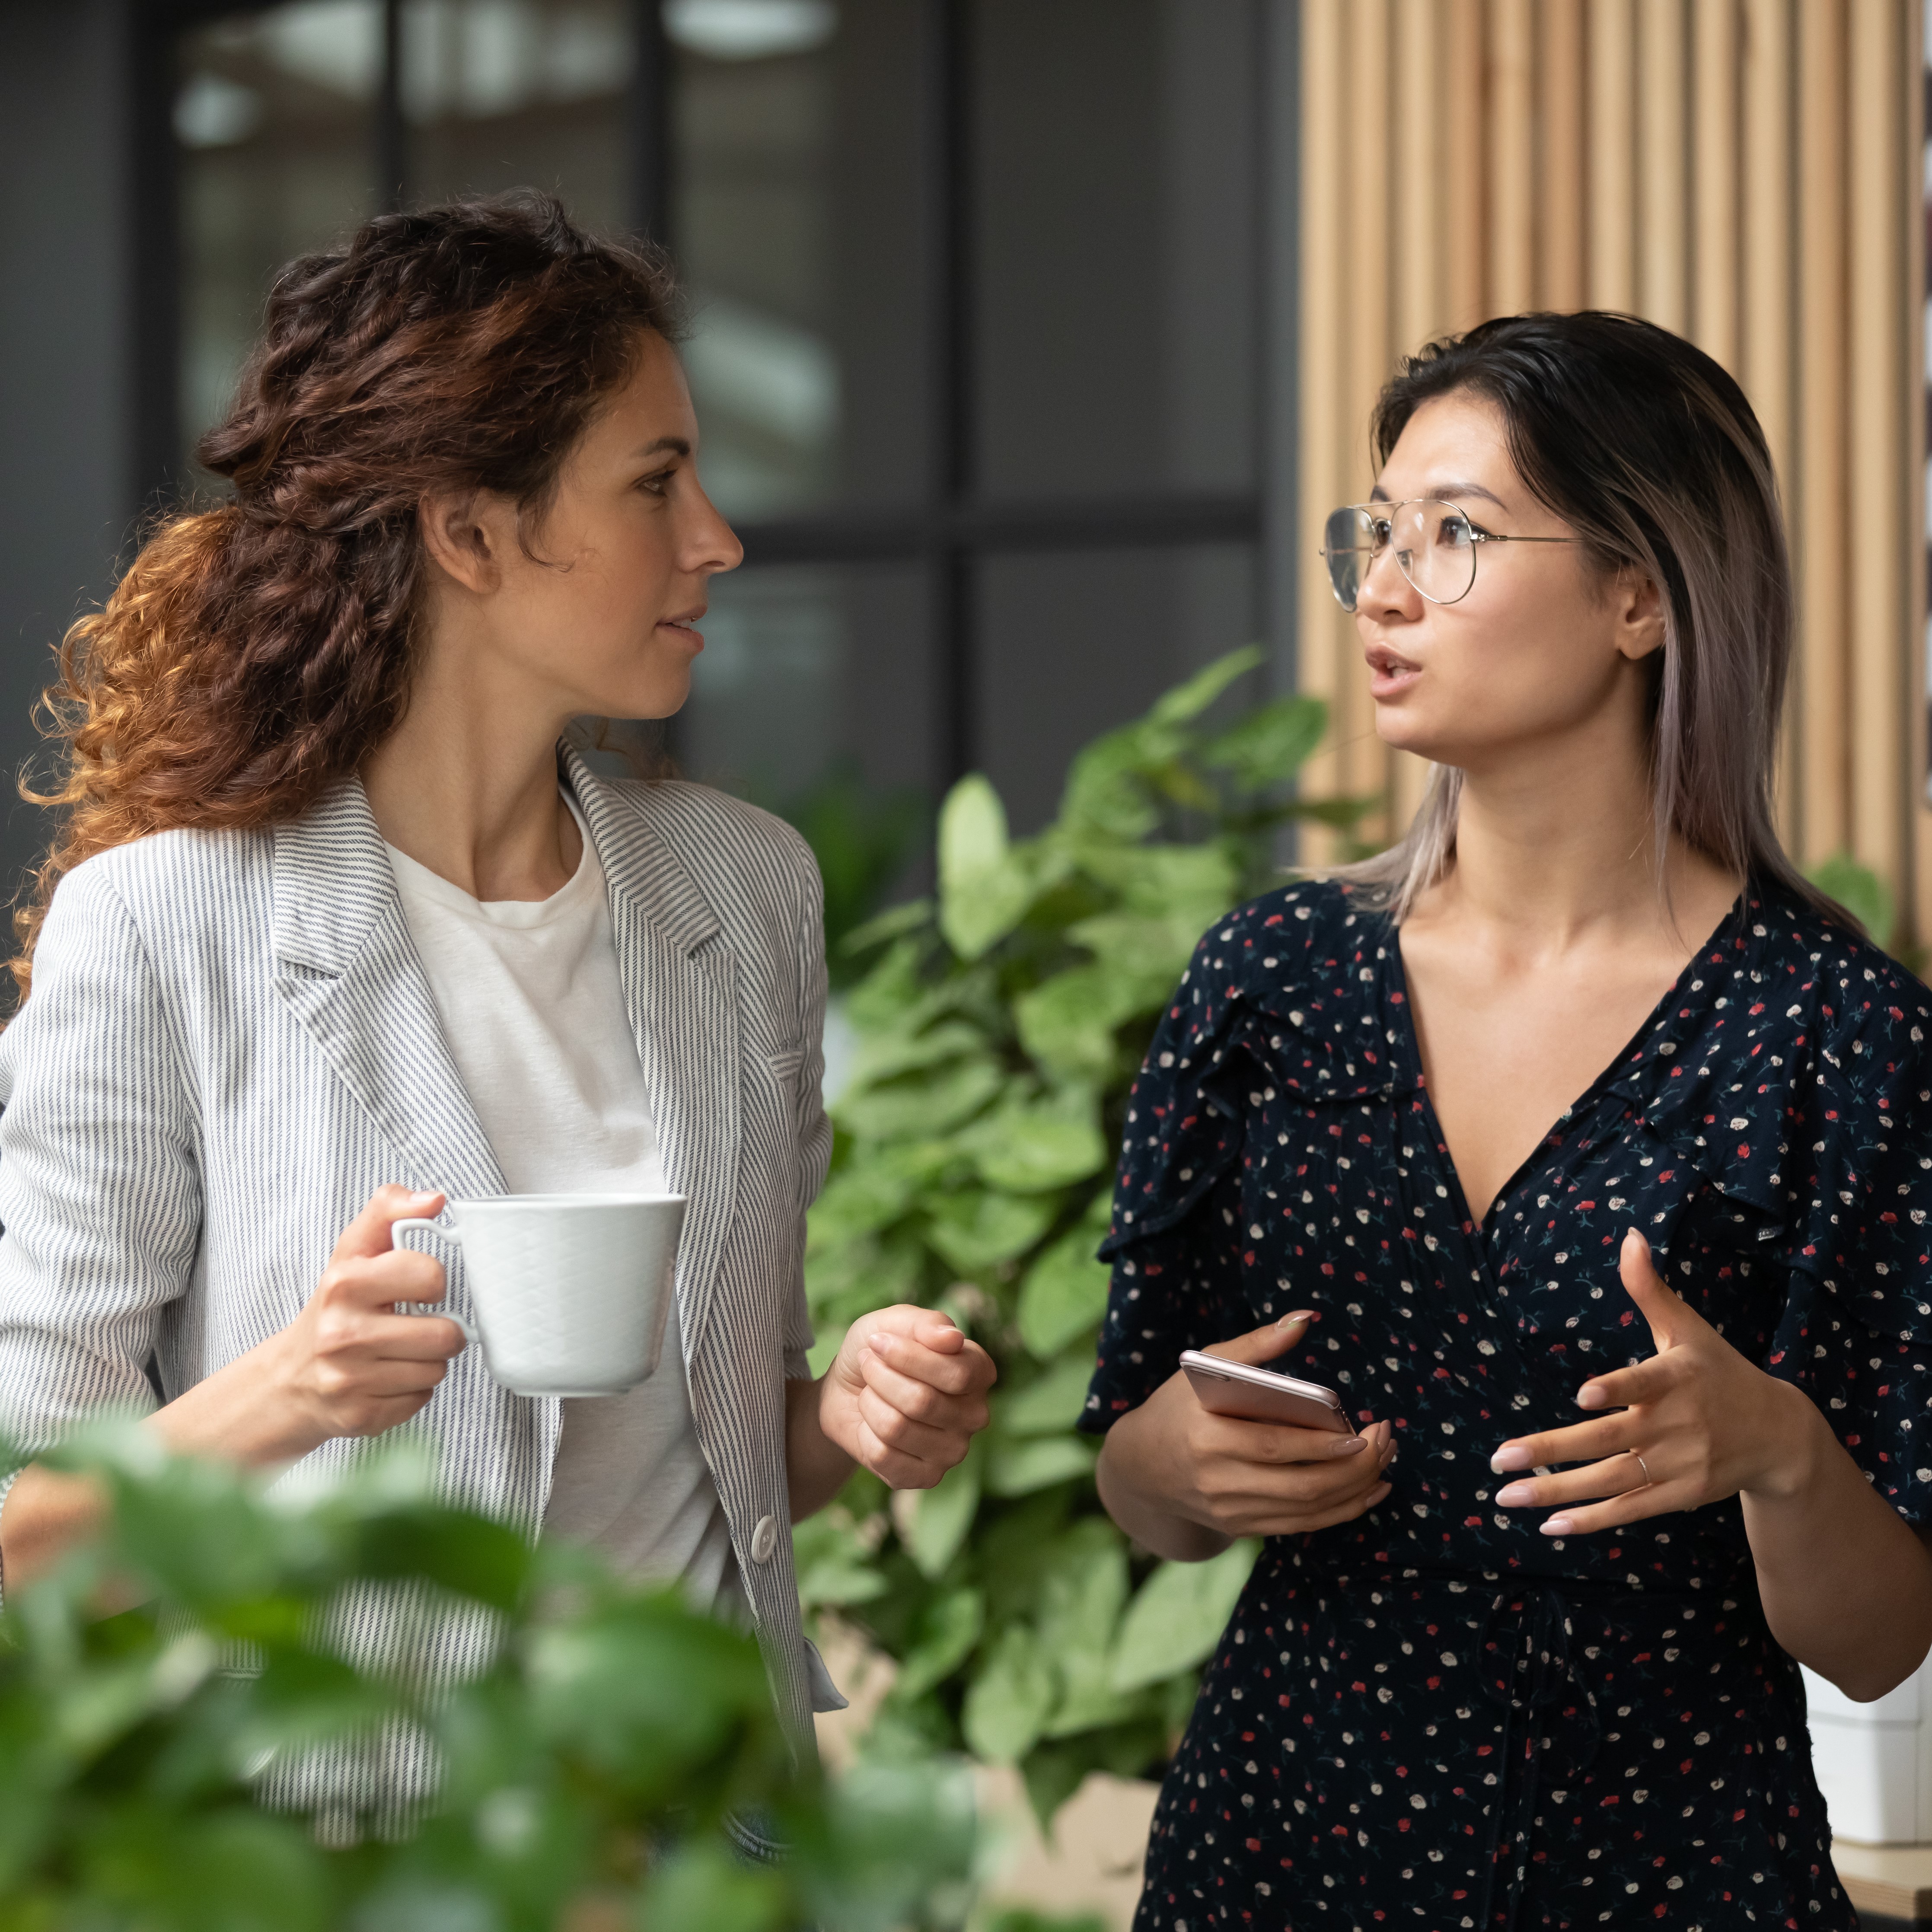 Two women, one white and one Asian, chat while on a coffee break from work, where they help to build a culture of equity.